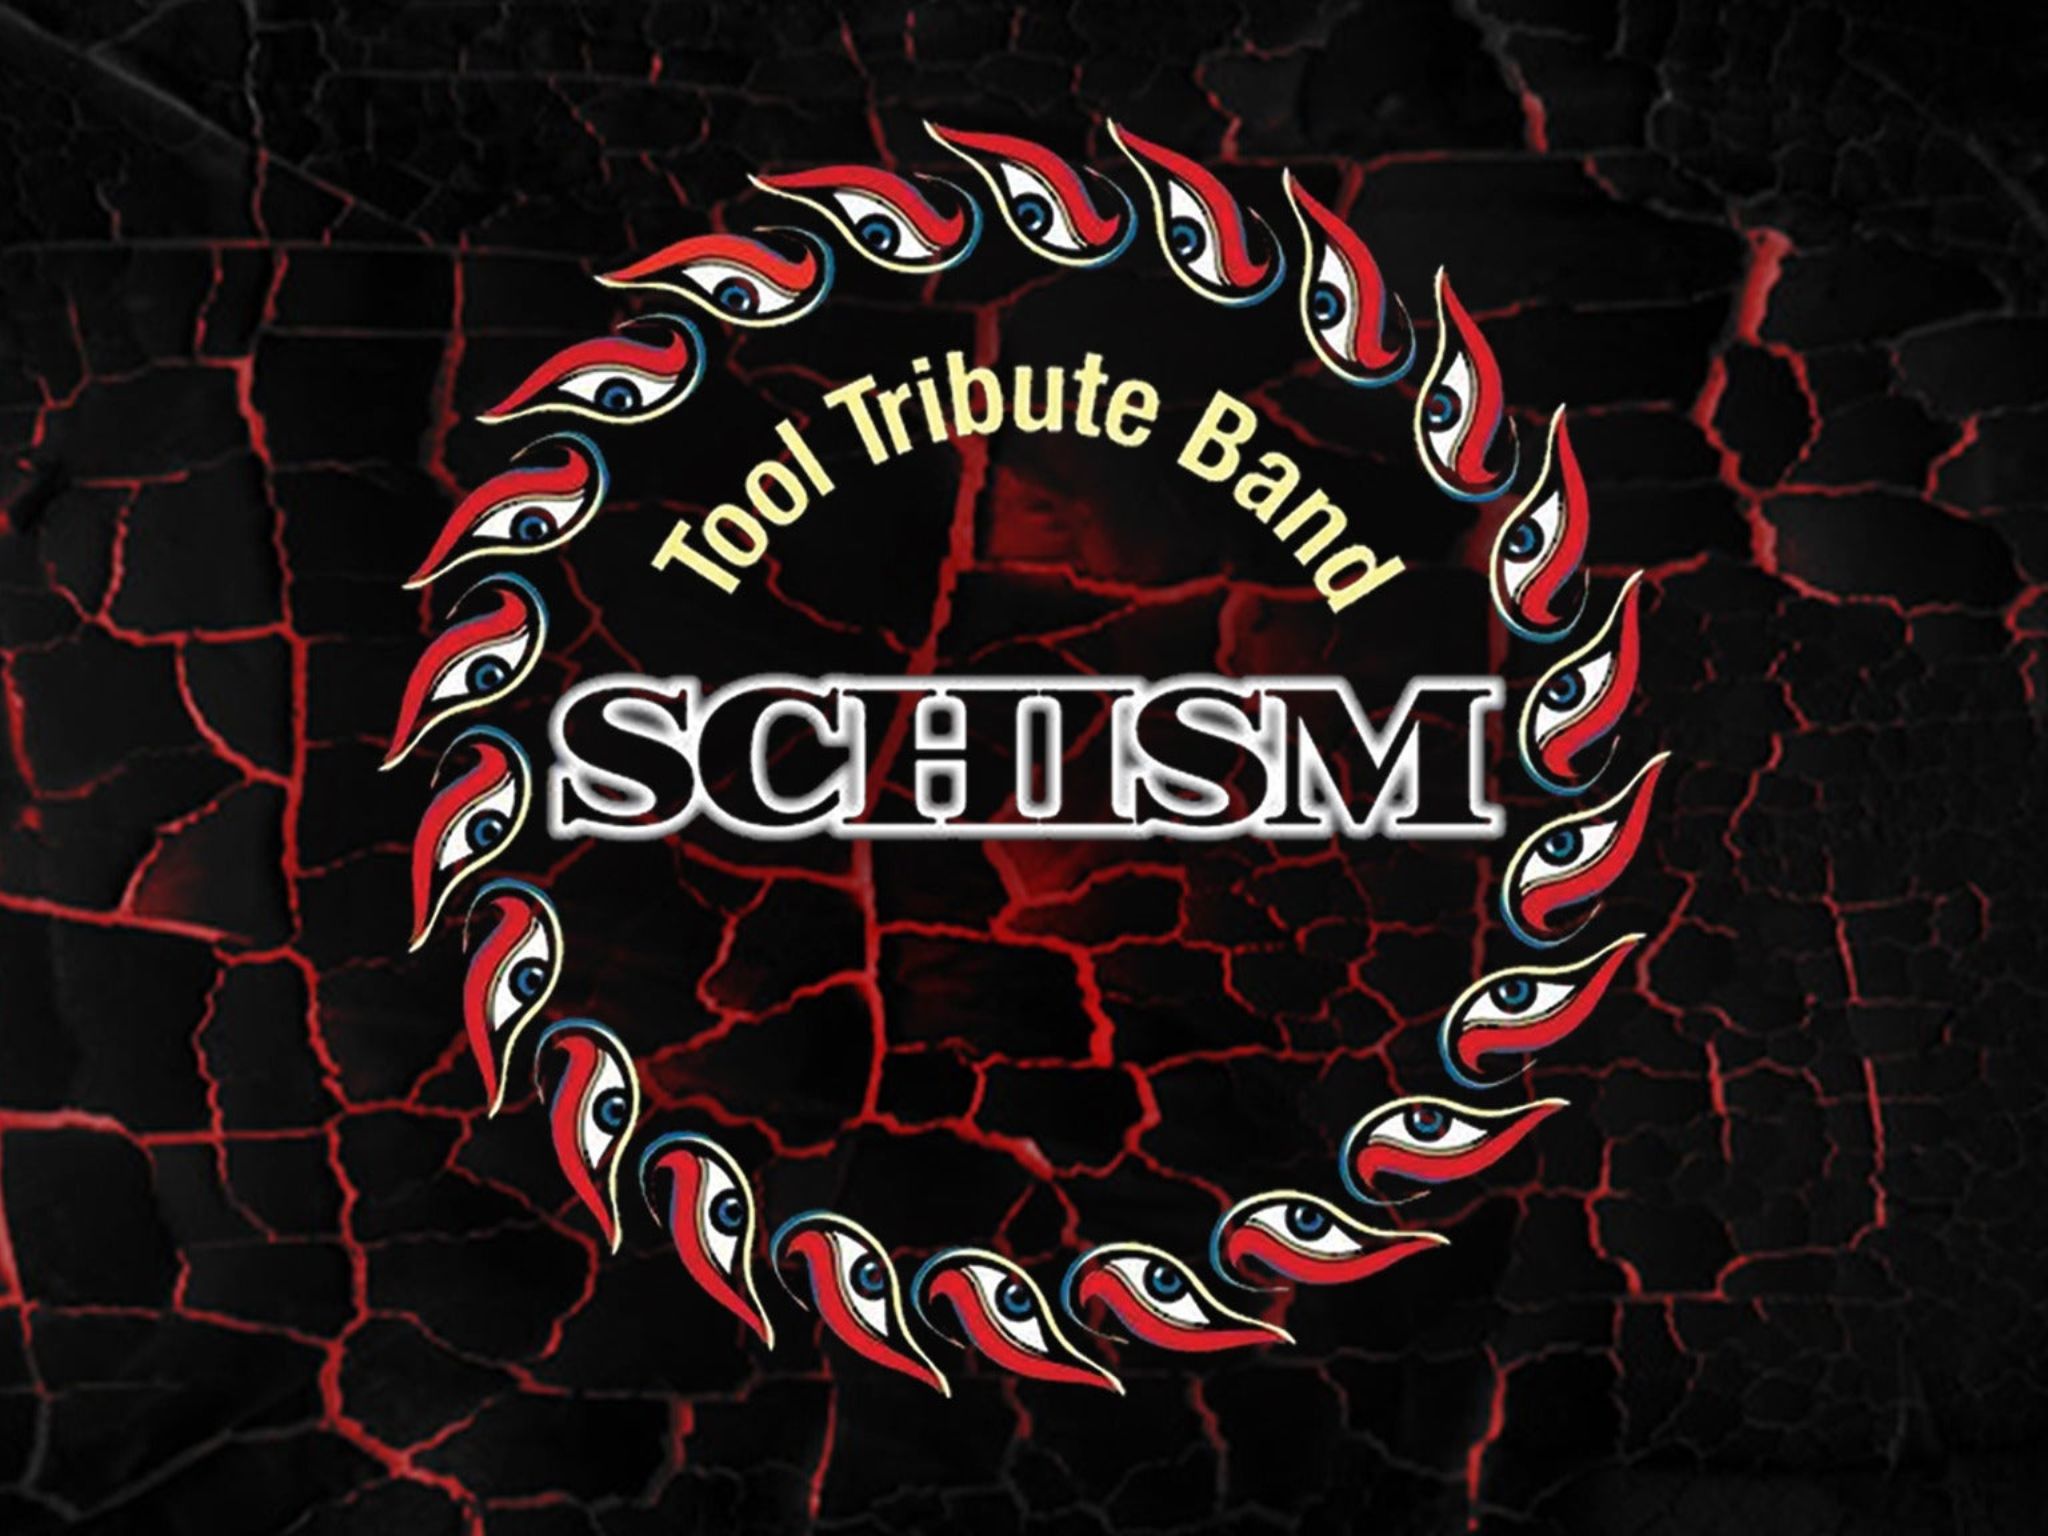 Schism, Tool Tribute Band